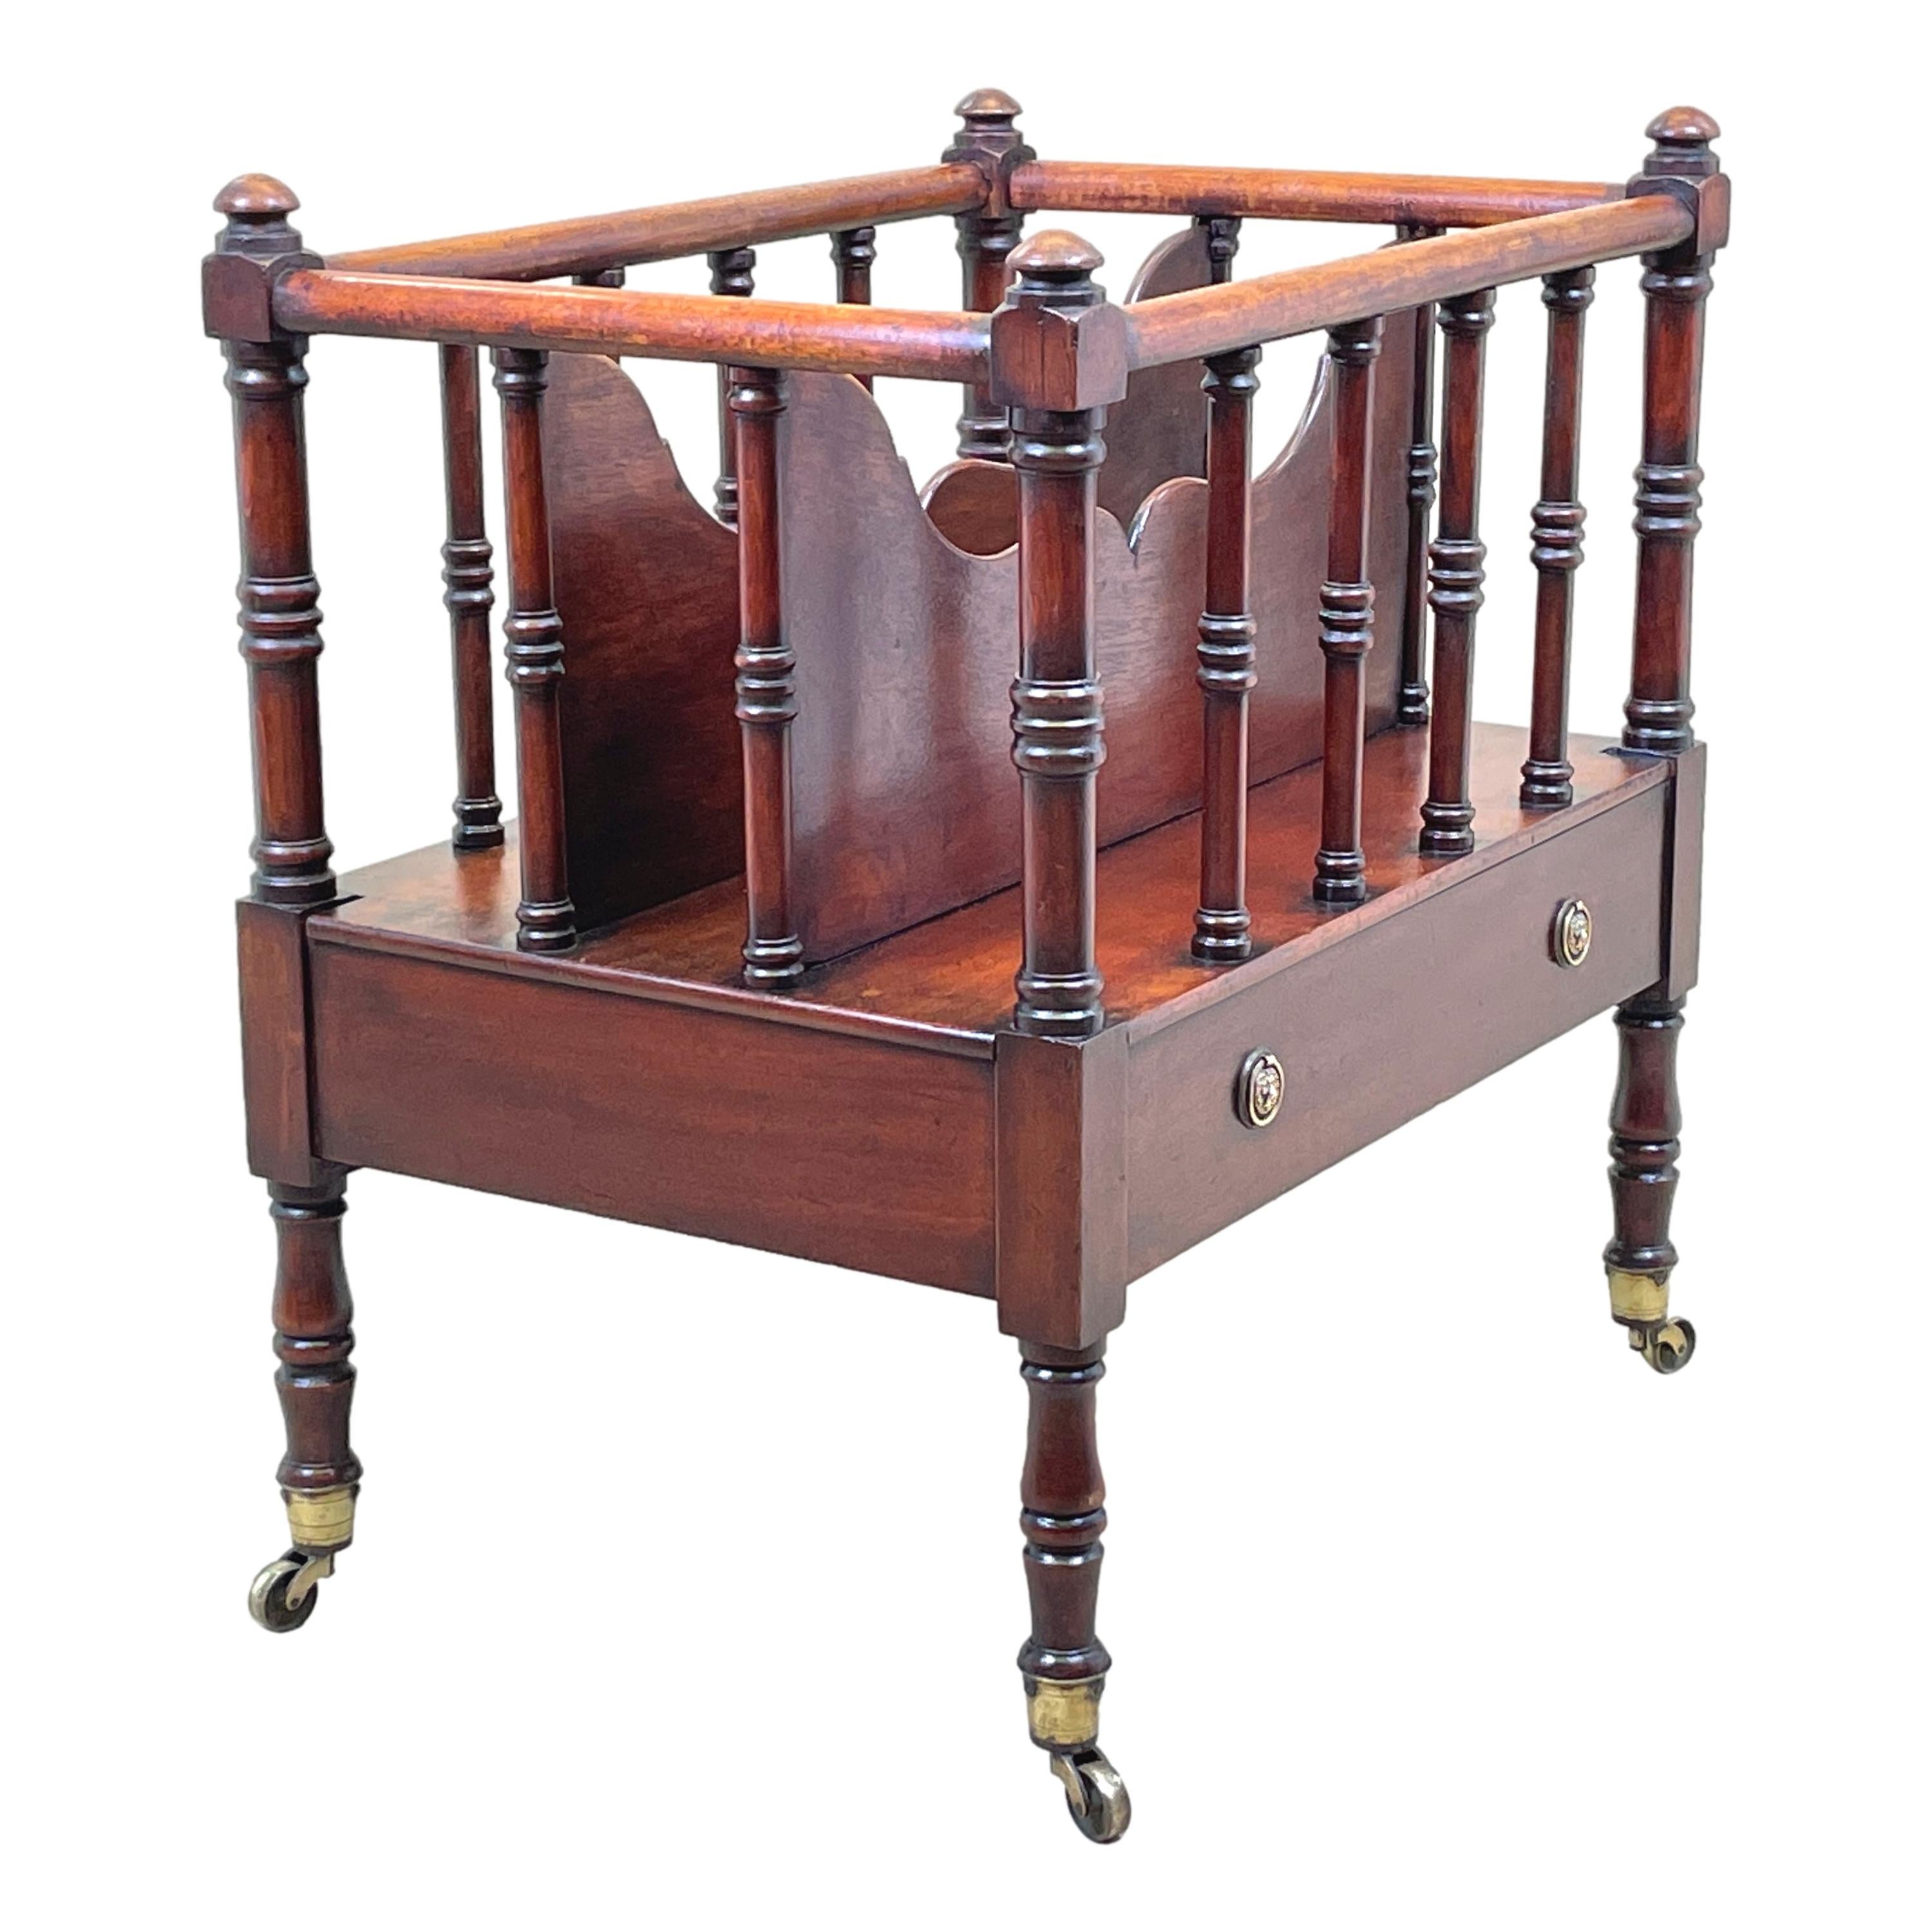 A Very Fine Quality Late Regency Period mahogany Canterbury, Of Unusual Form, With Elegant Turned Spindle Type Supports To Outer Gallery Enclosing Solid Shaped Dividers, Over One Frieze Drawer With Replacement Brass Handles, Raised On Elegant Tall